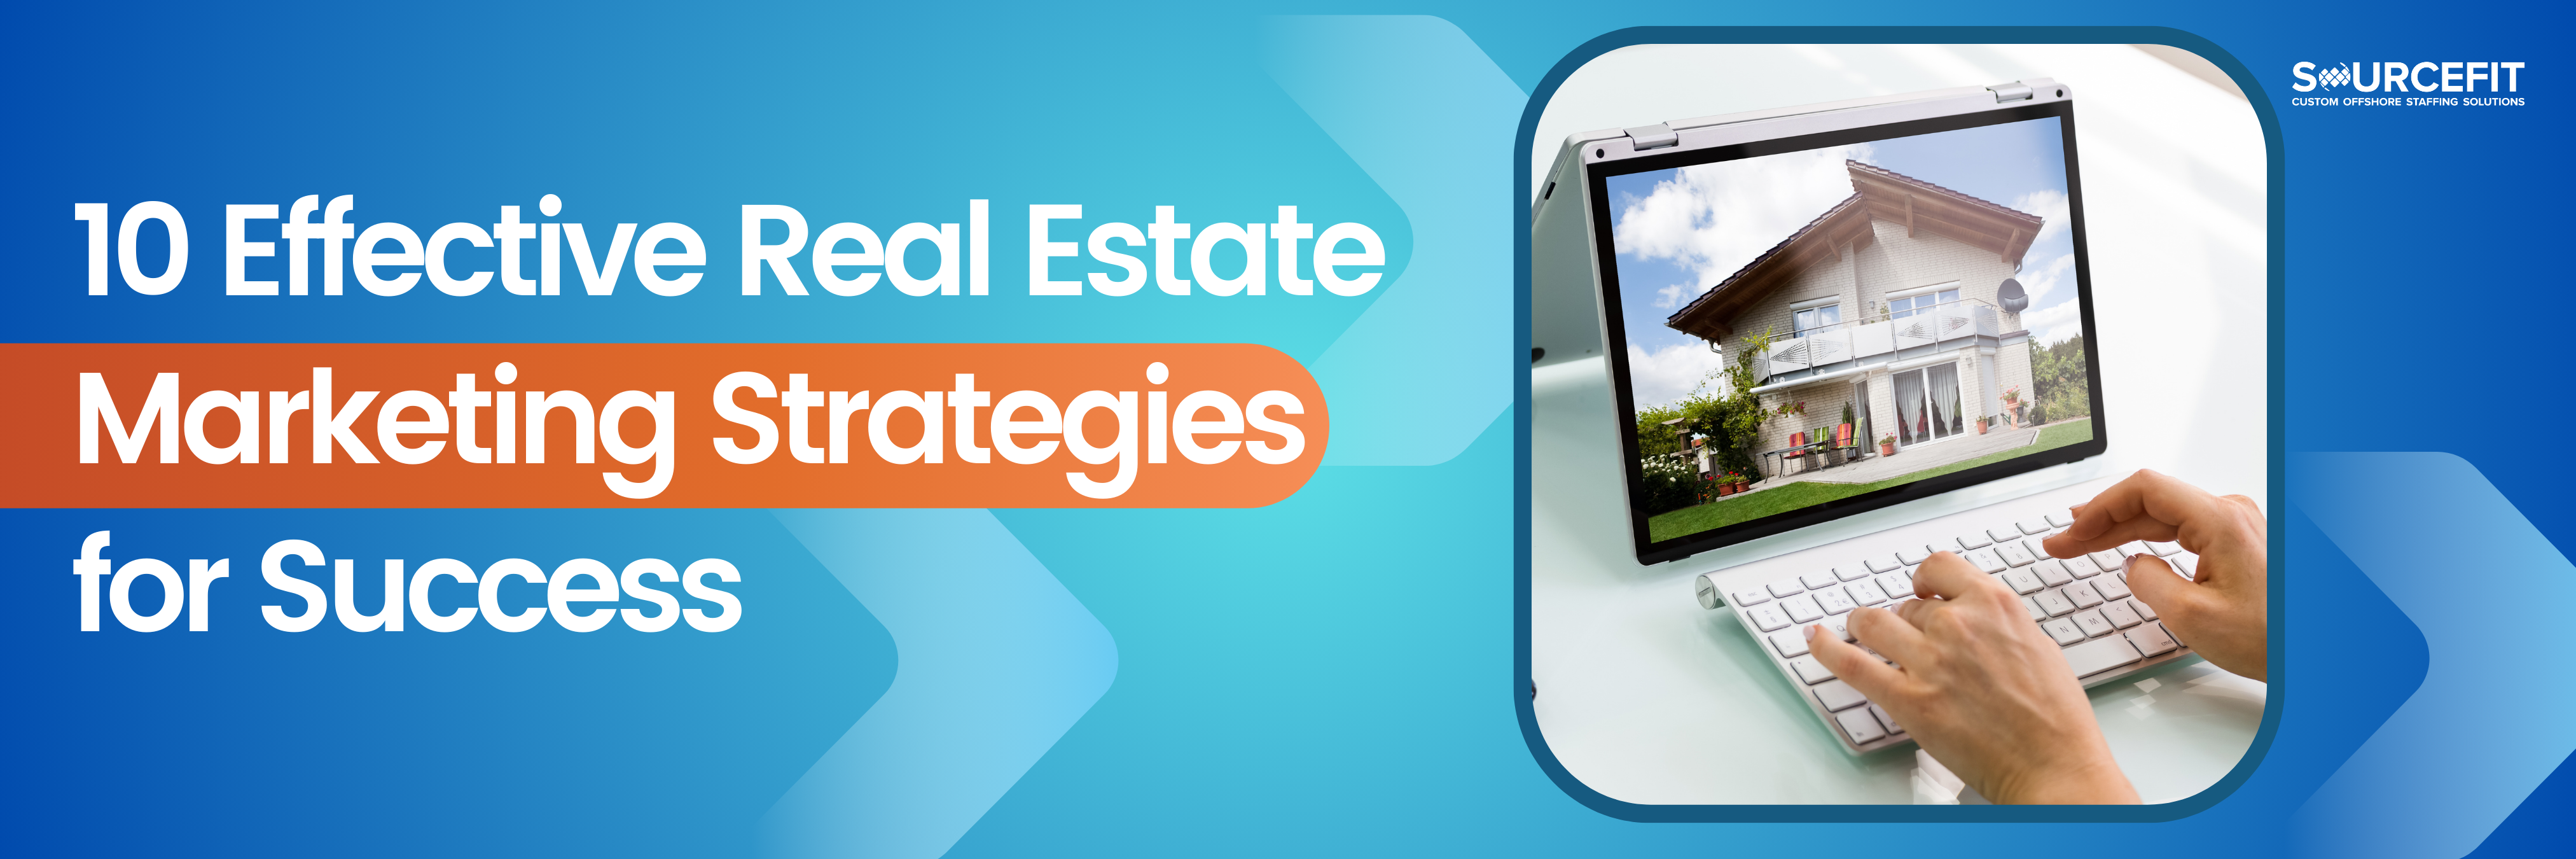 10 Effective Real Estate Marketing Strategies for Success_1200x628